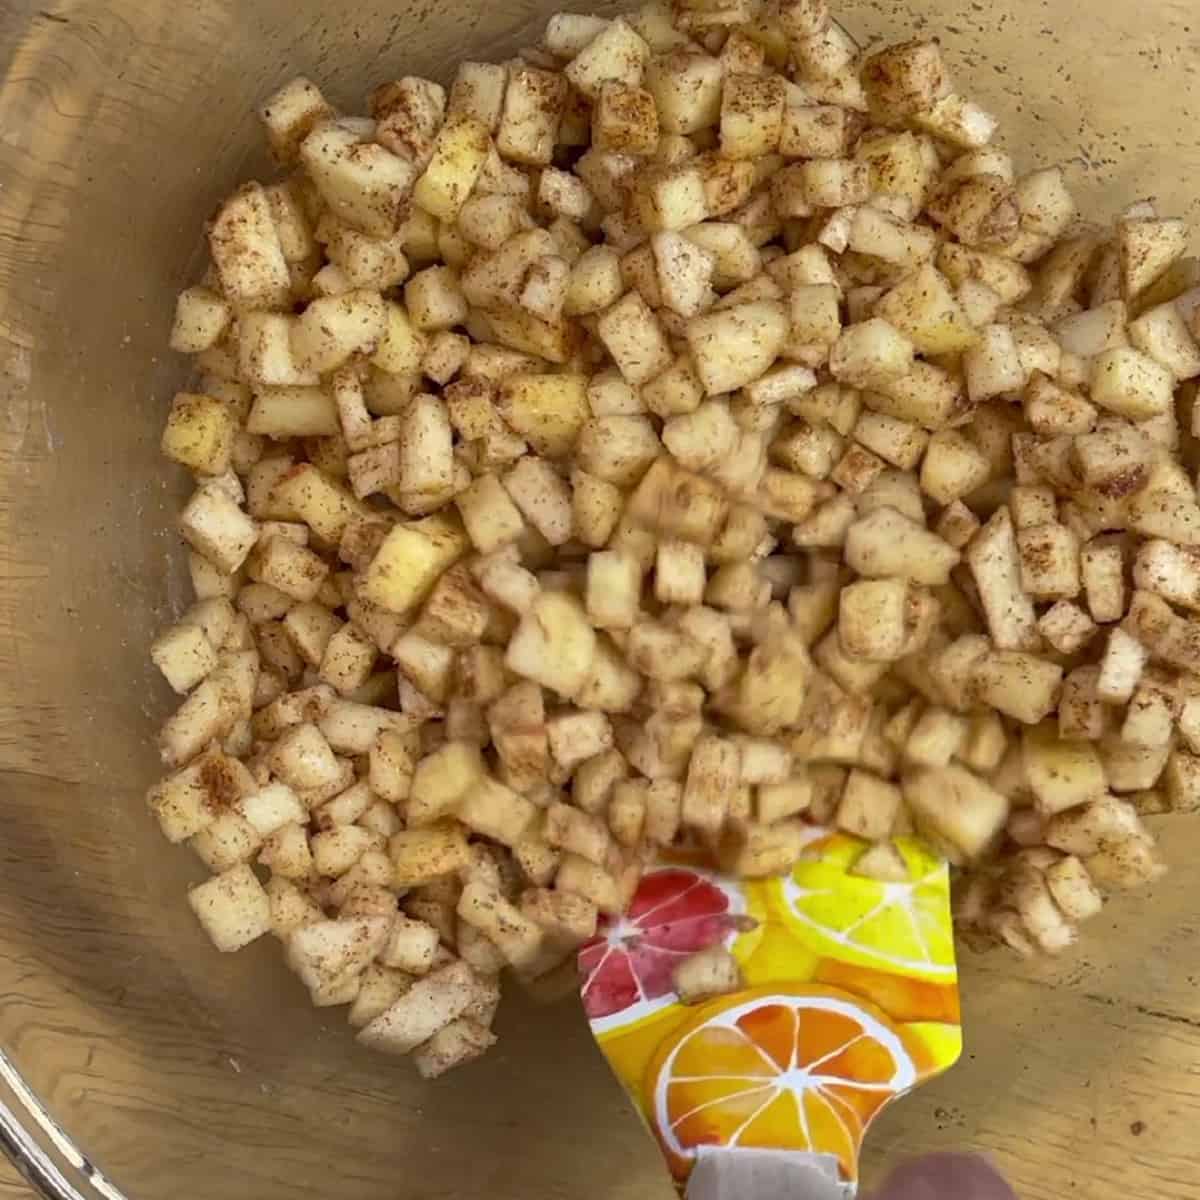 Diced apples mixed with cinnamon and sugar in a bowl with a spatula.